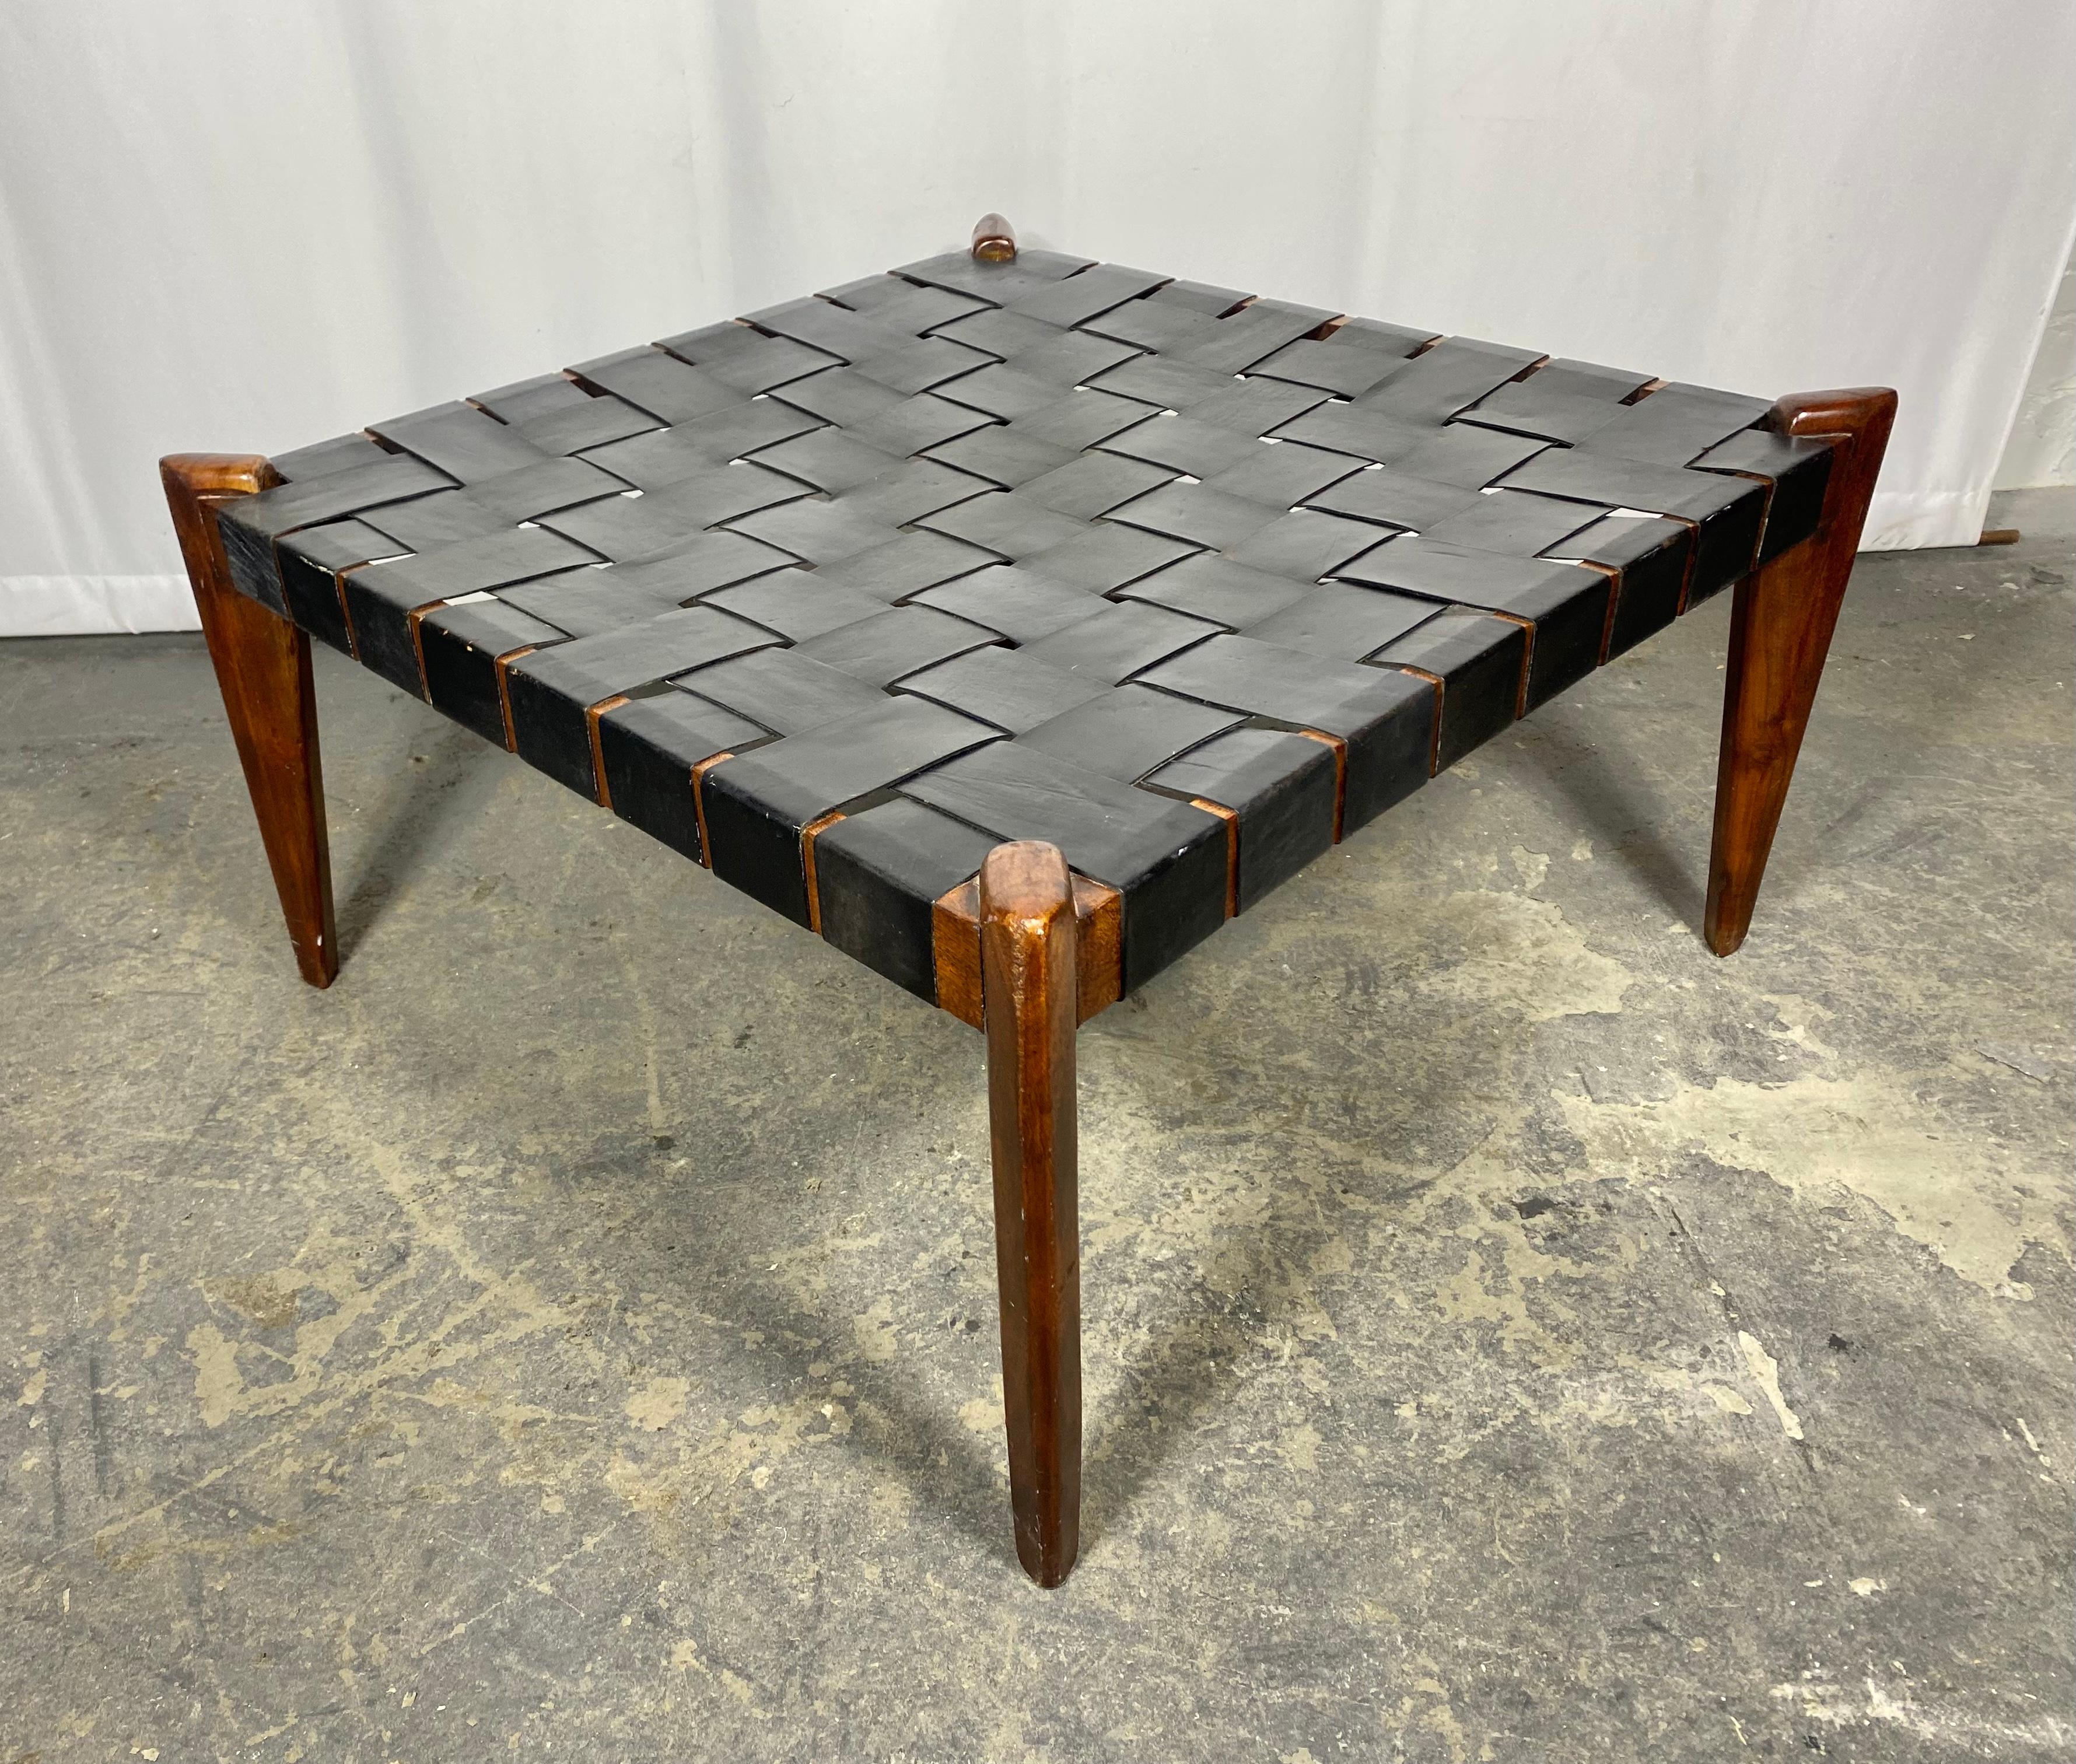  Modernist Woven Leather / Rosewood  Table , Ottoman  by Edmond Spence In Good Condition For Sale In Buffalo, NY